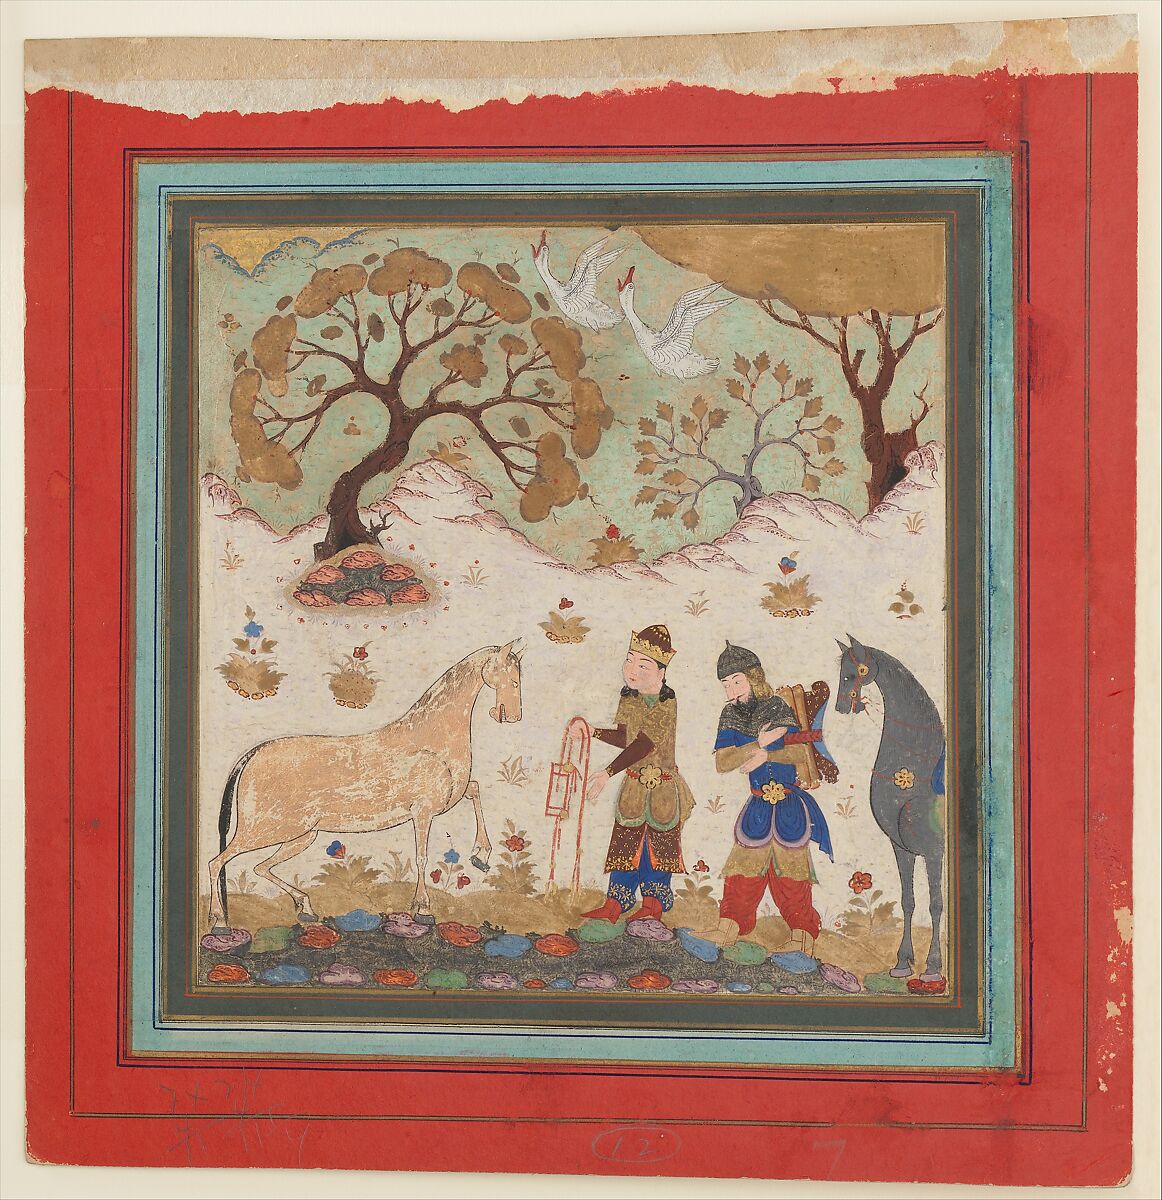 "Rustam Captures Rakhsh", Folio from a Shahnama (Book of Kings), Abu'l Qasim Firdausi  Iranian, Main support: Ink, opaque watercolor, gold on paper<br/>Margins: Ink and gold on dyed paper